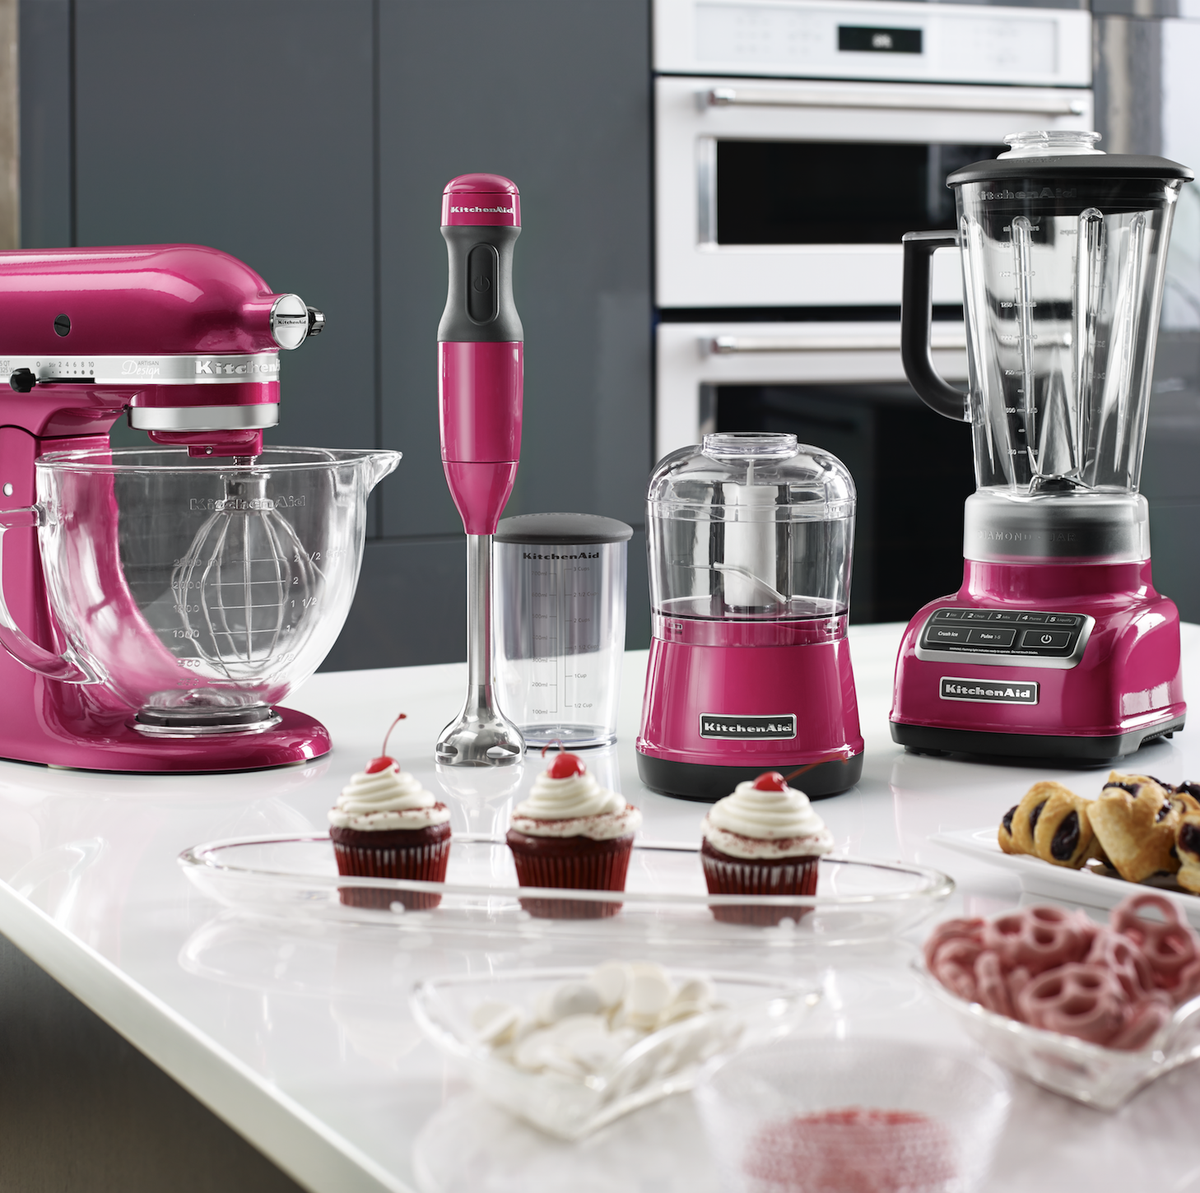 KitchenAid stand mixers and immersion blenders are up to 25 percent off